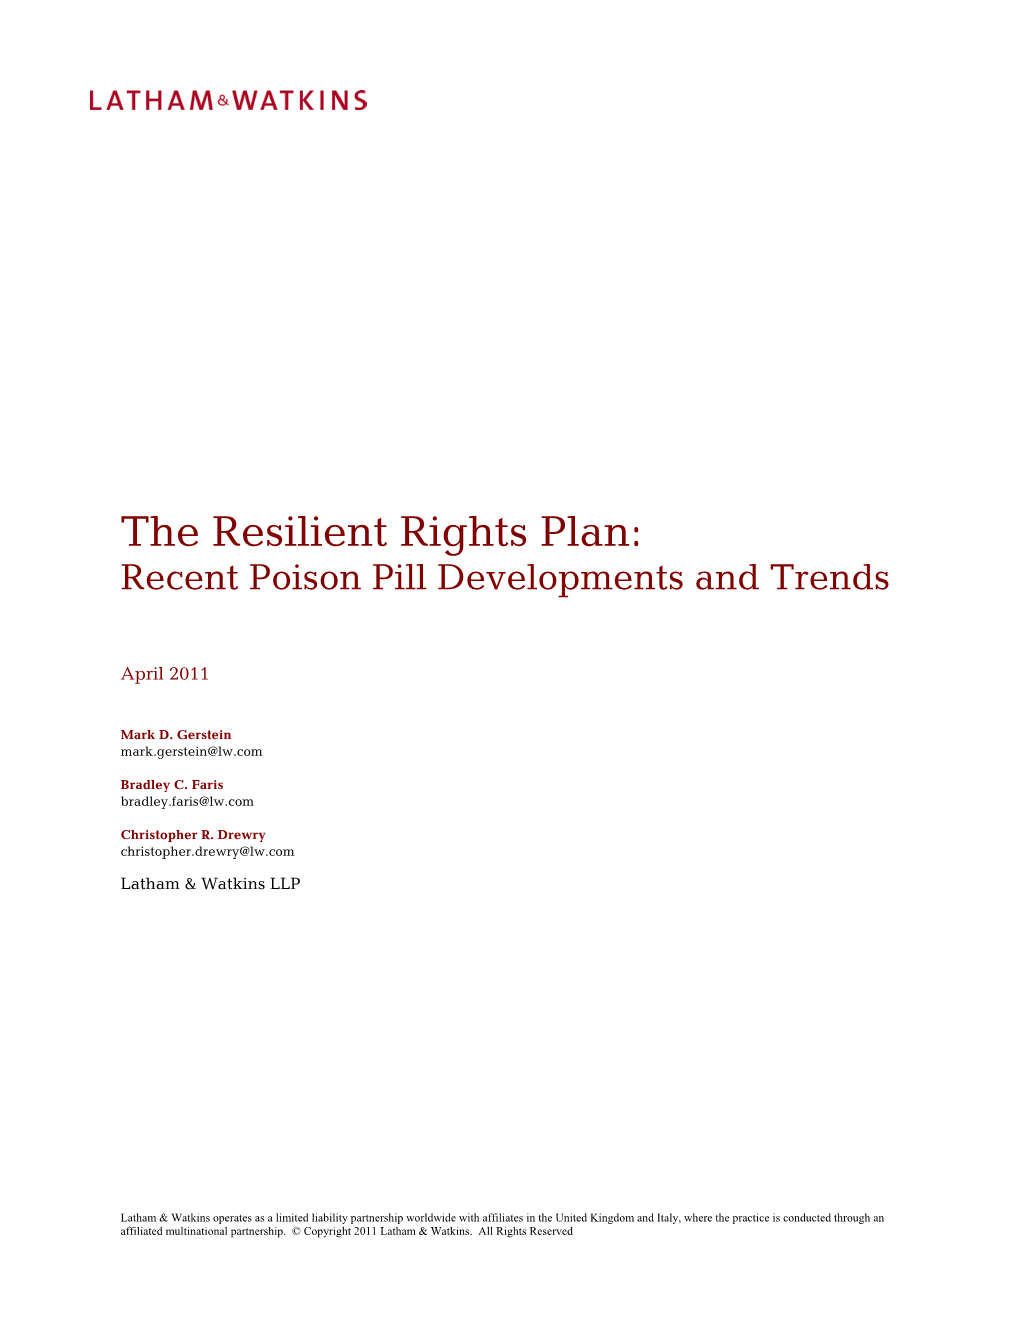 The Resilient Rights Plan: Recent Poison Pill Developments and Trends